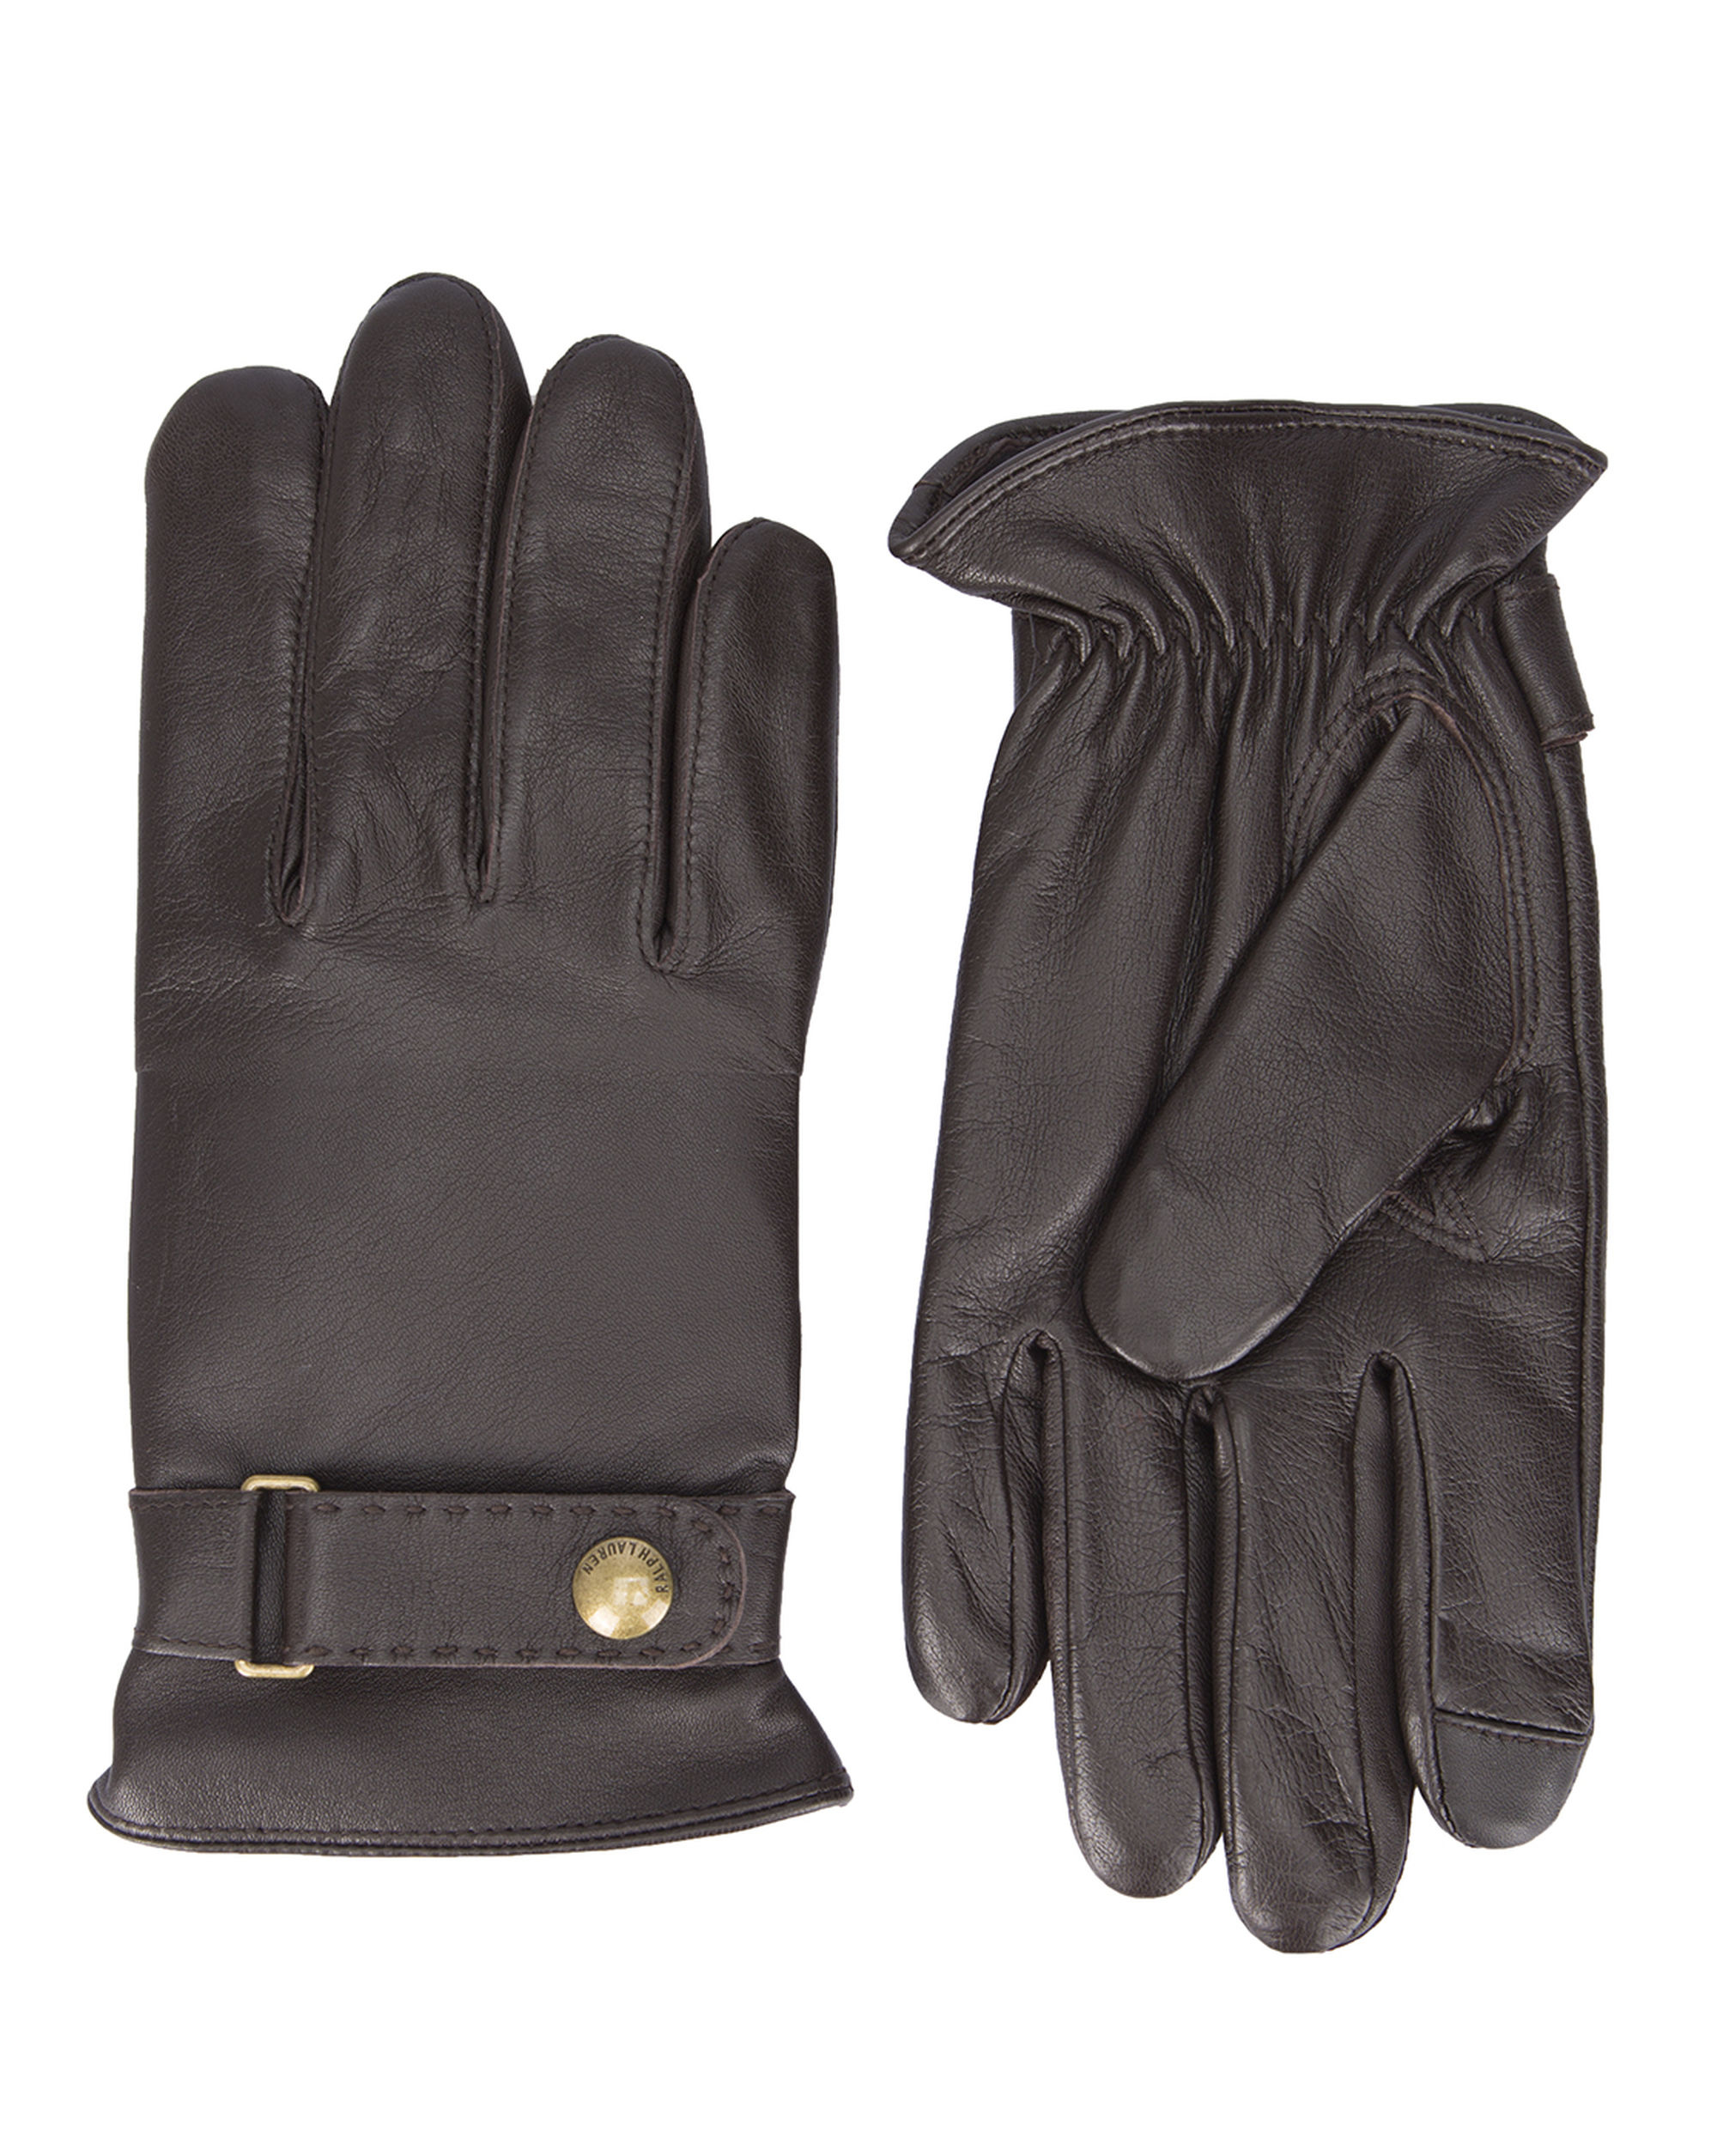 Polo ralph lauren Leather Gloves in Brown for Men - Save 11% | Lyst